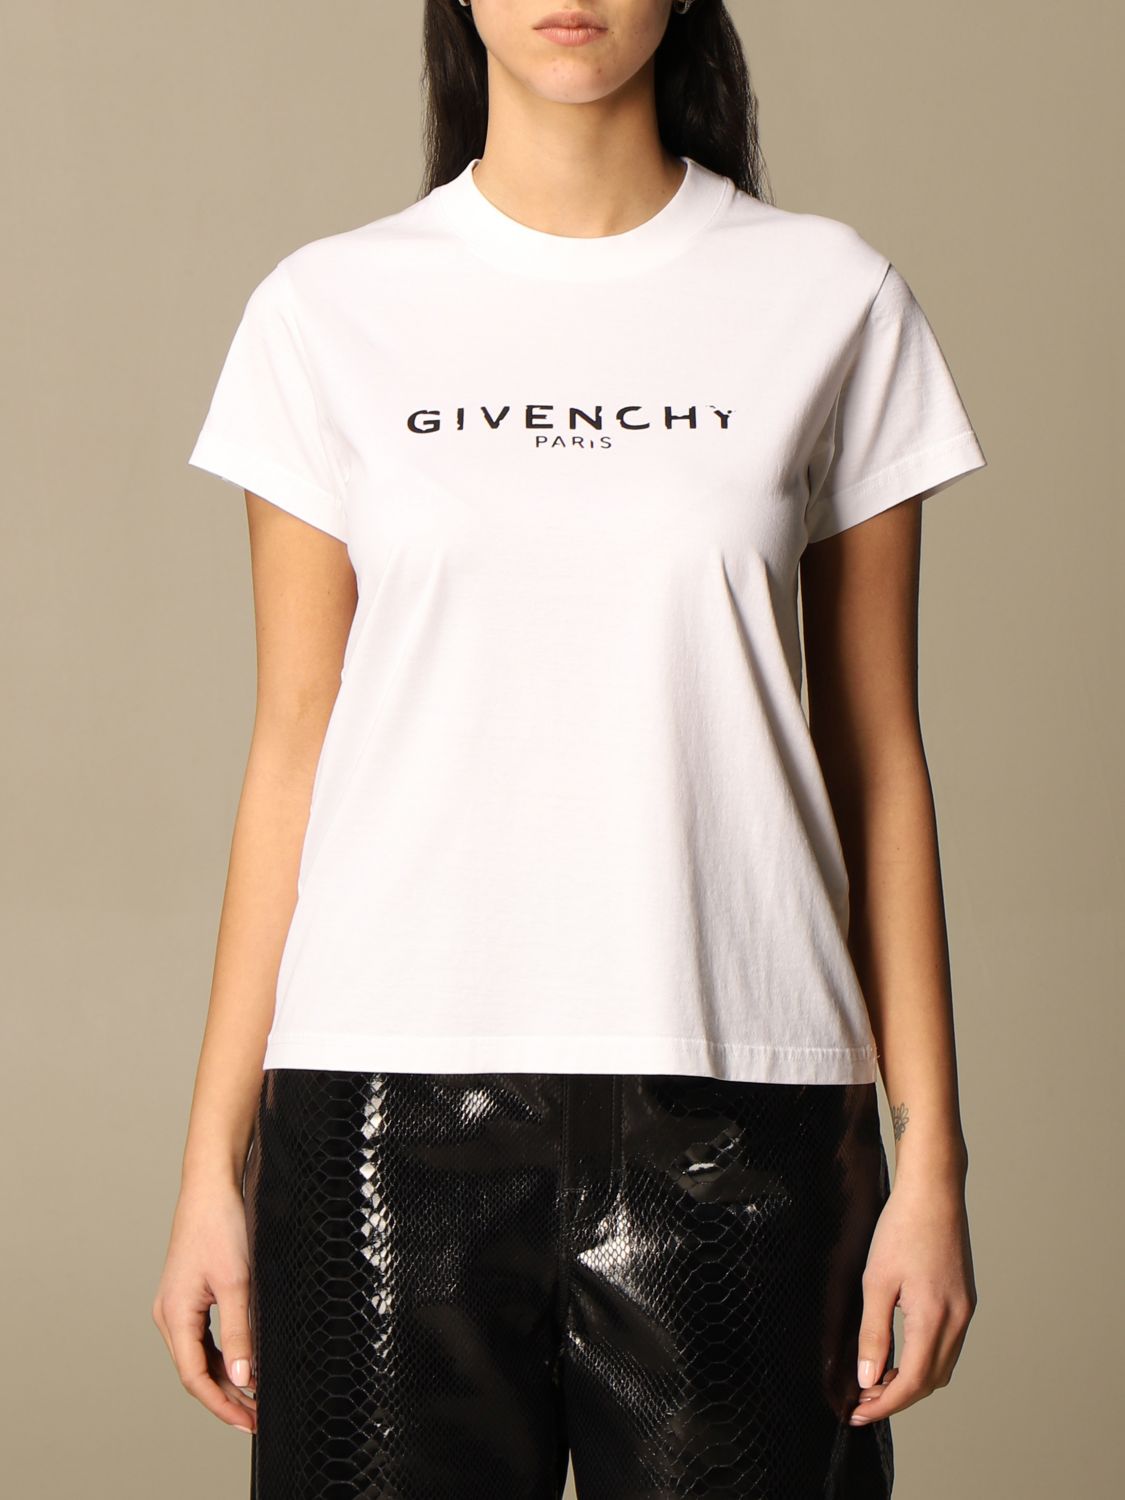 givenchy top white